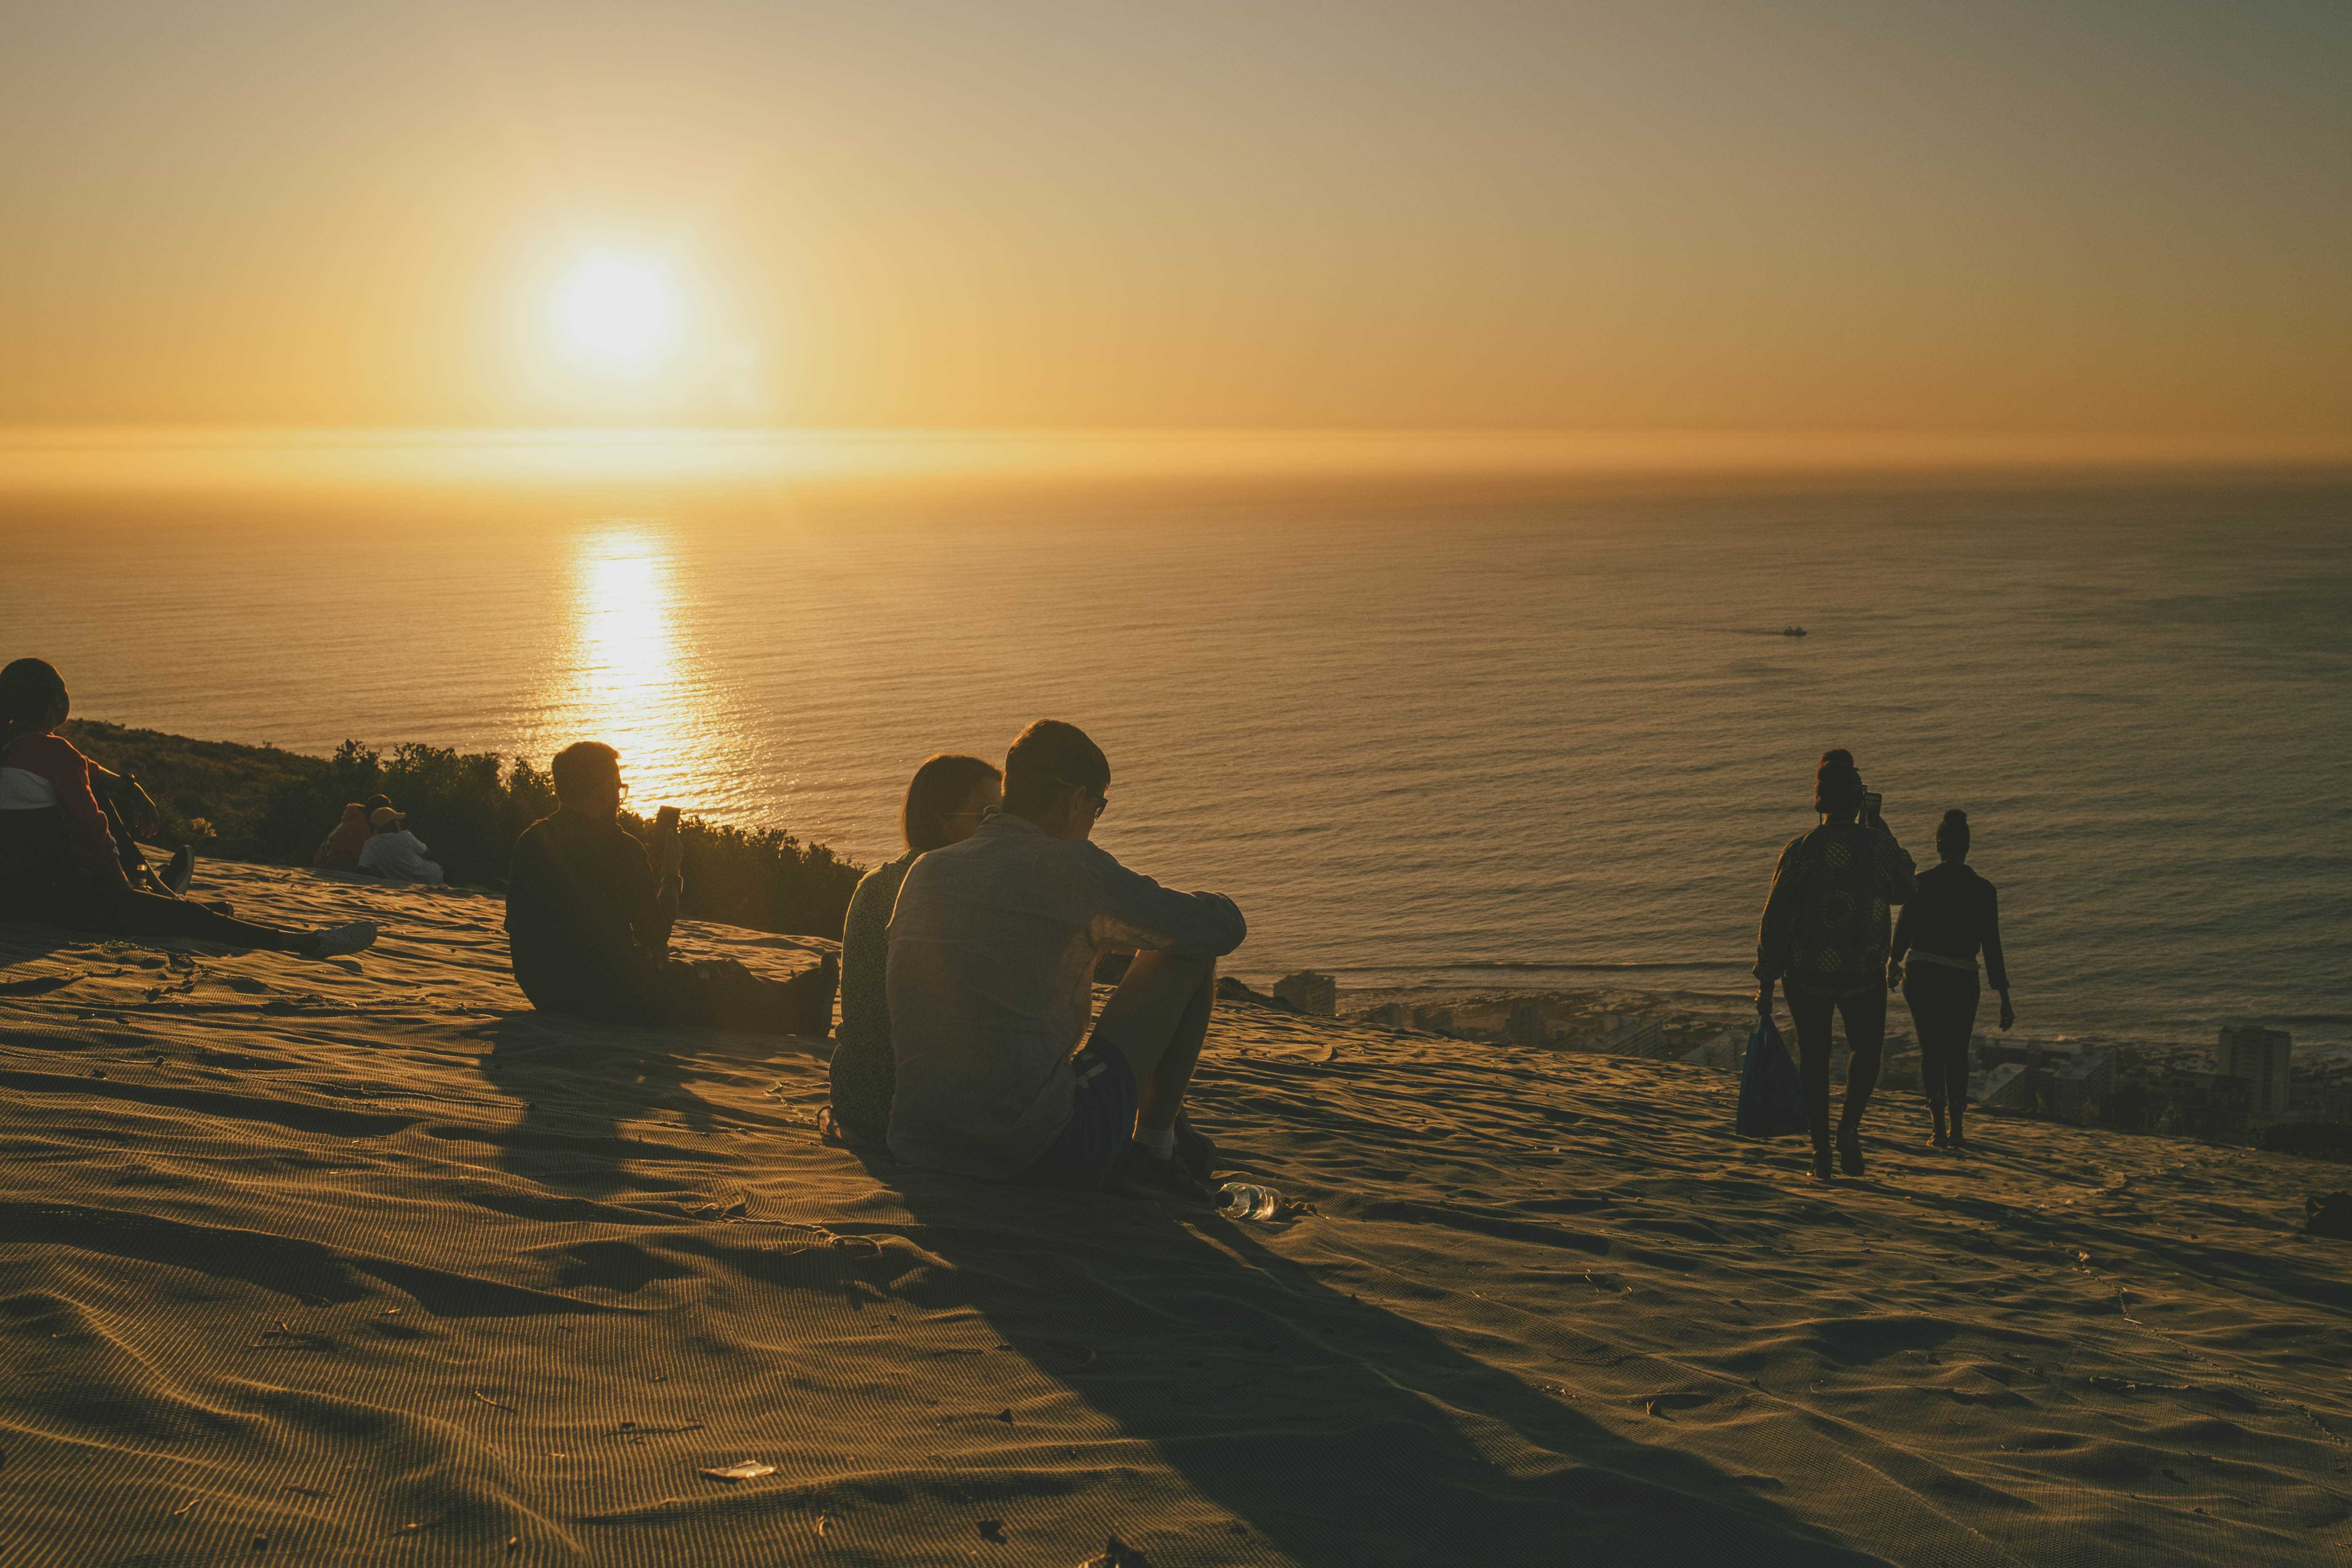 Sunset with a crowd of people relaxing to watch it on Signal Hill